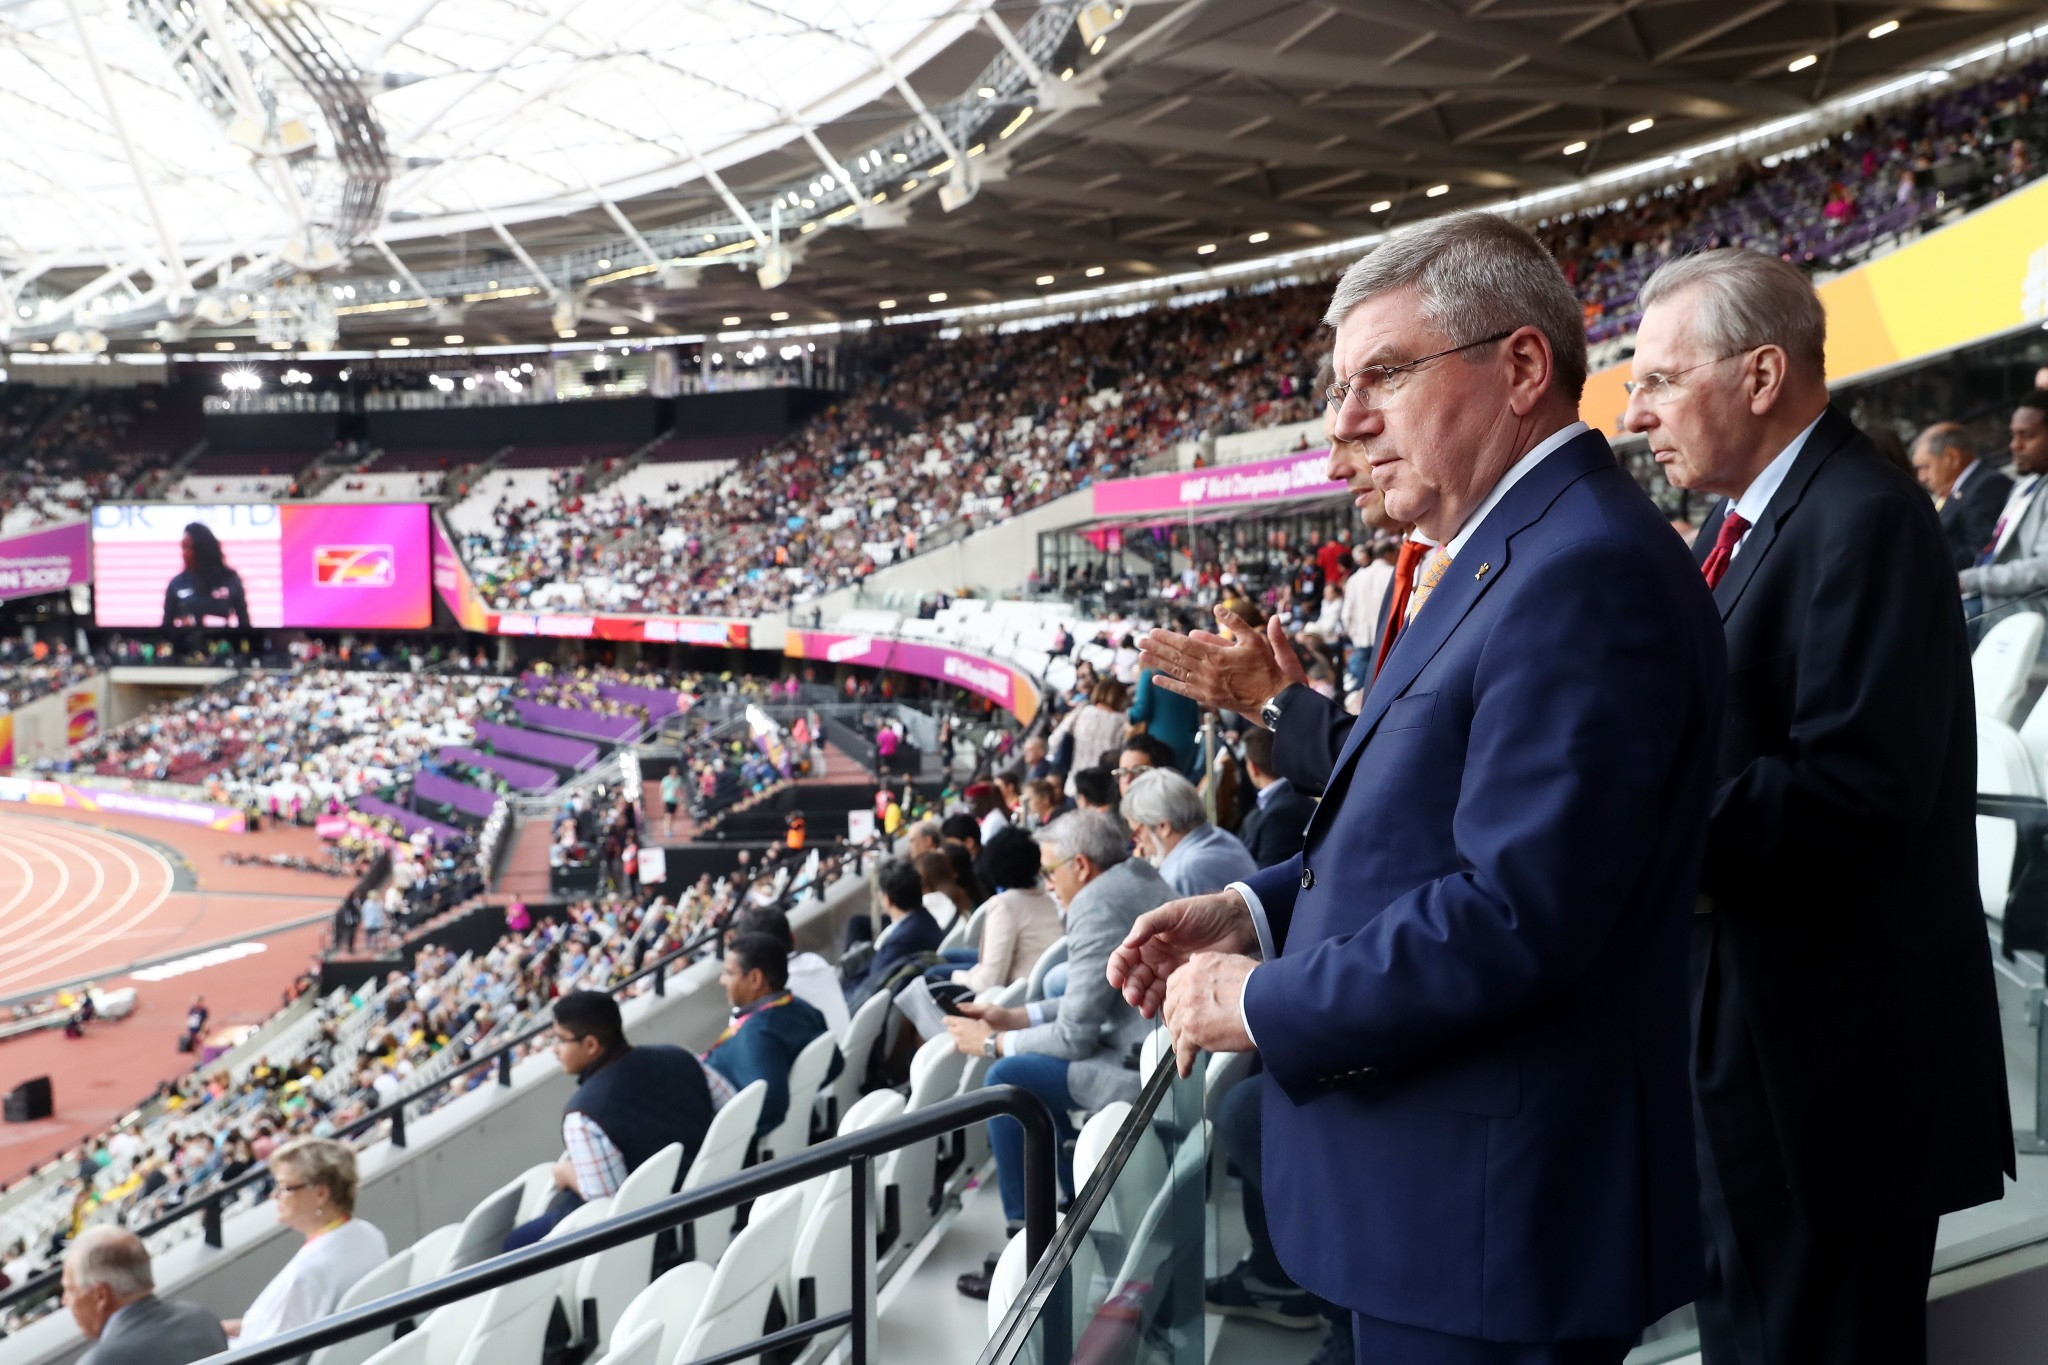 Past and present IOC Presidents Jacques Rogge, right, and Thomas Bach, watch the World Athletics Championships in London ©Getty Images